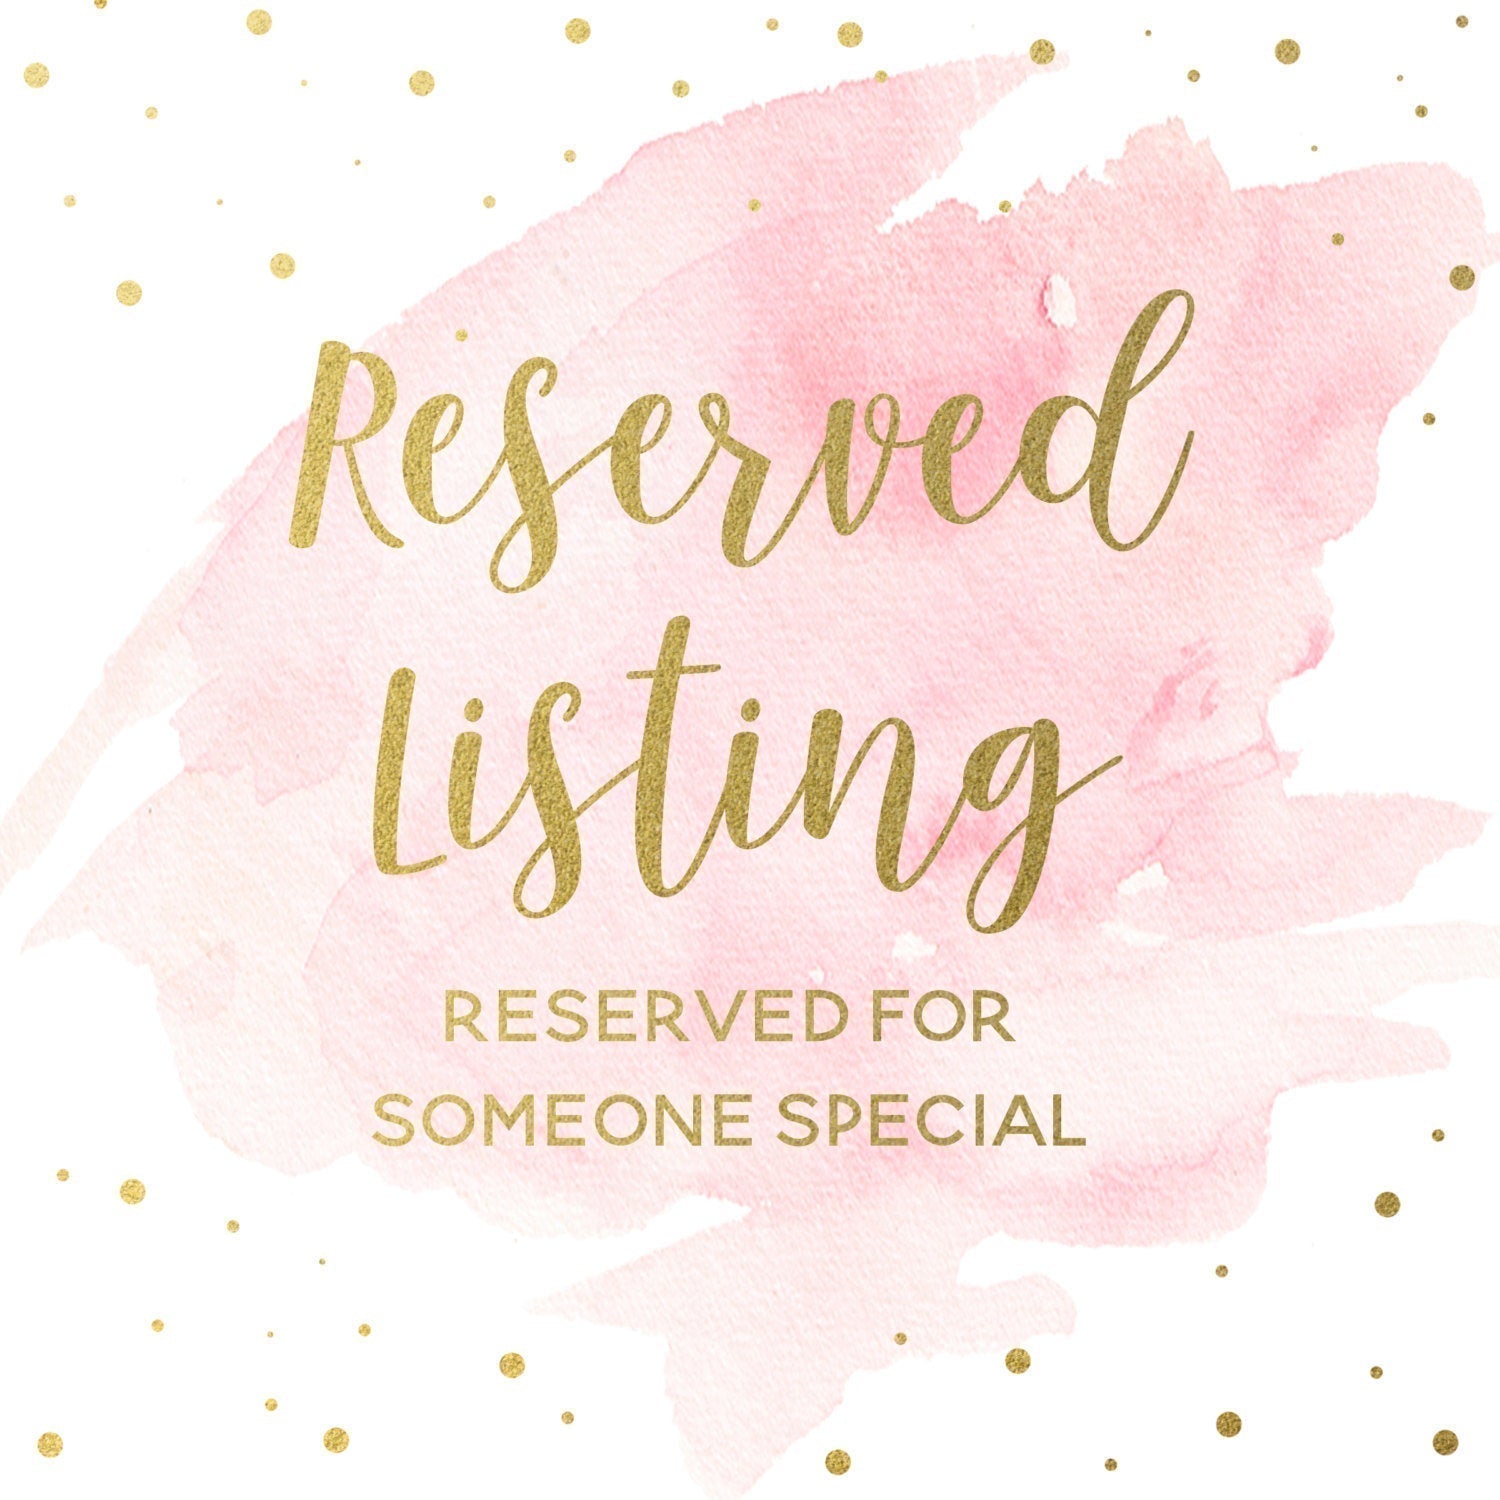 Reserved Listing - K Beito